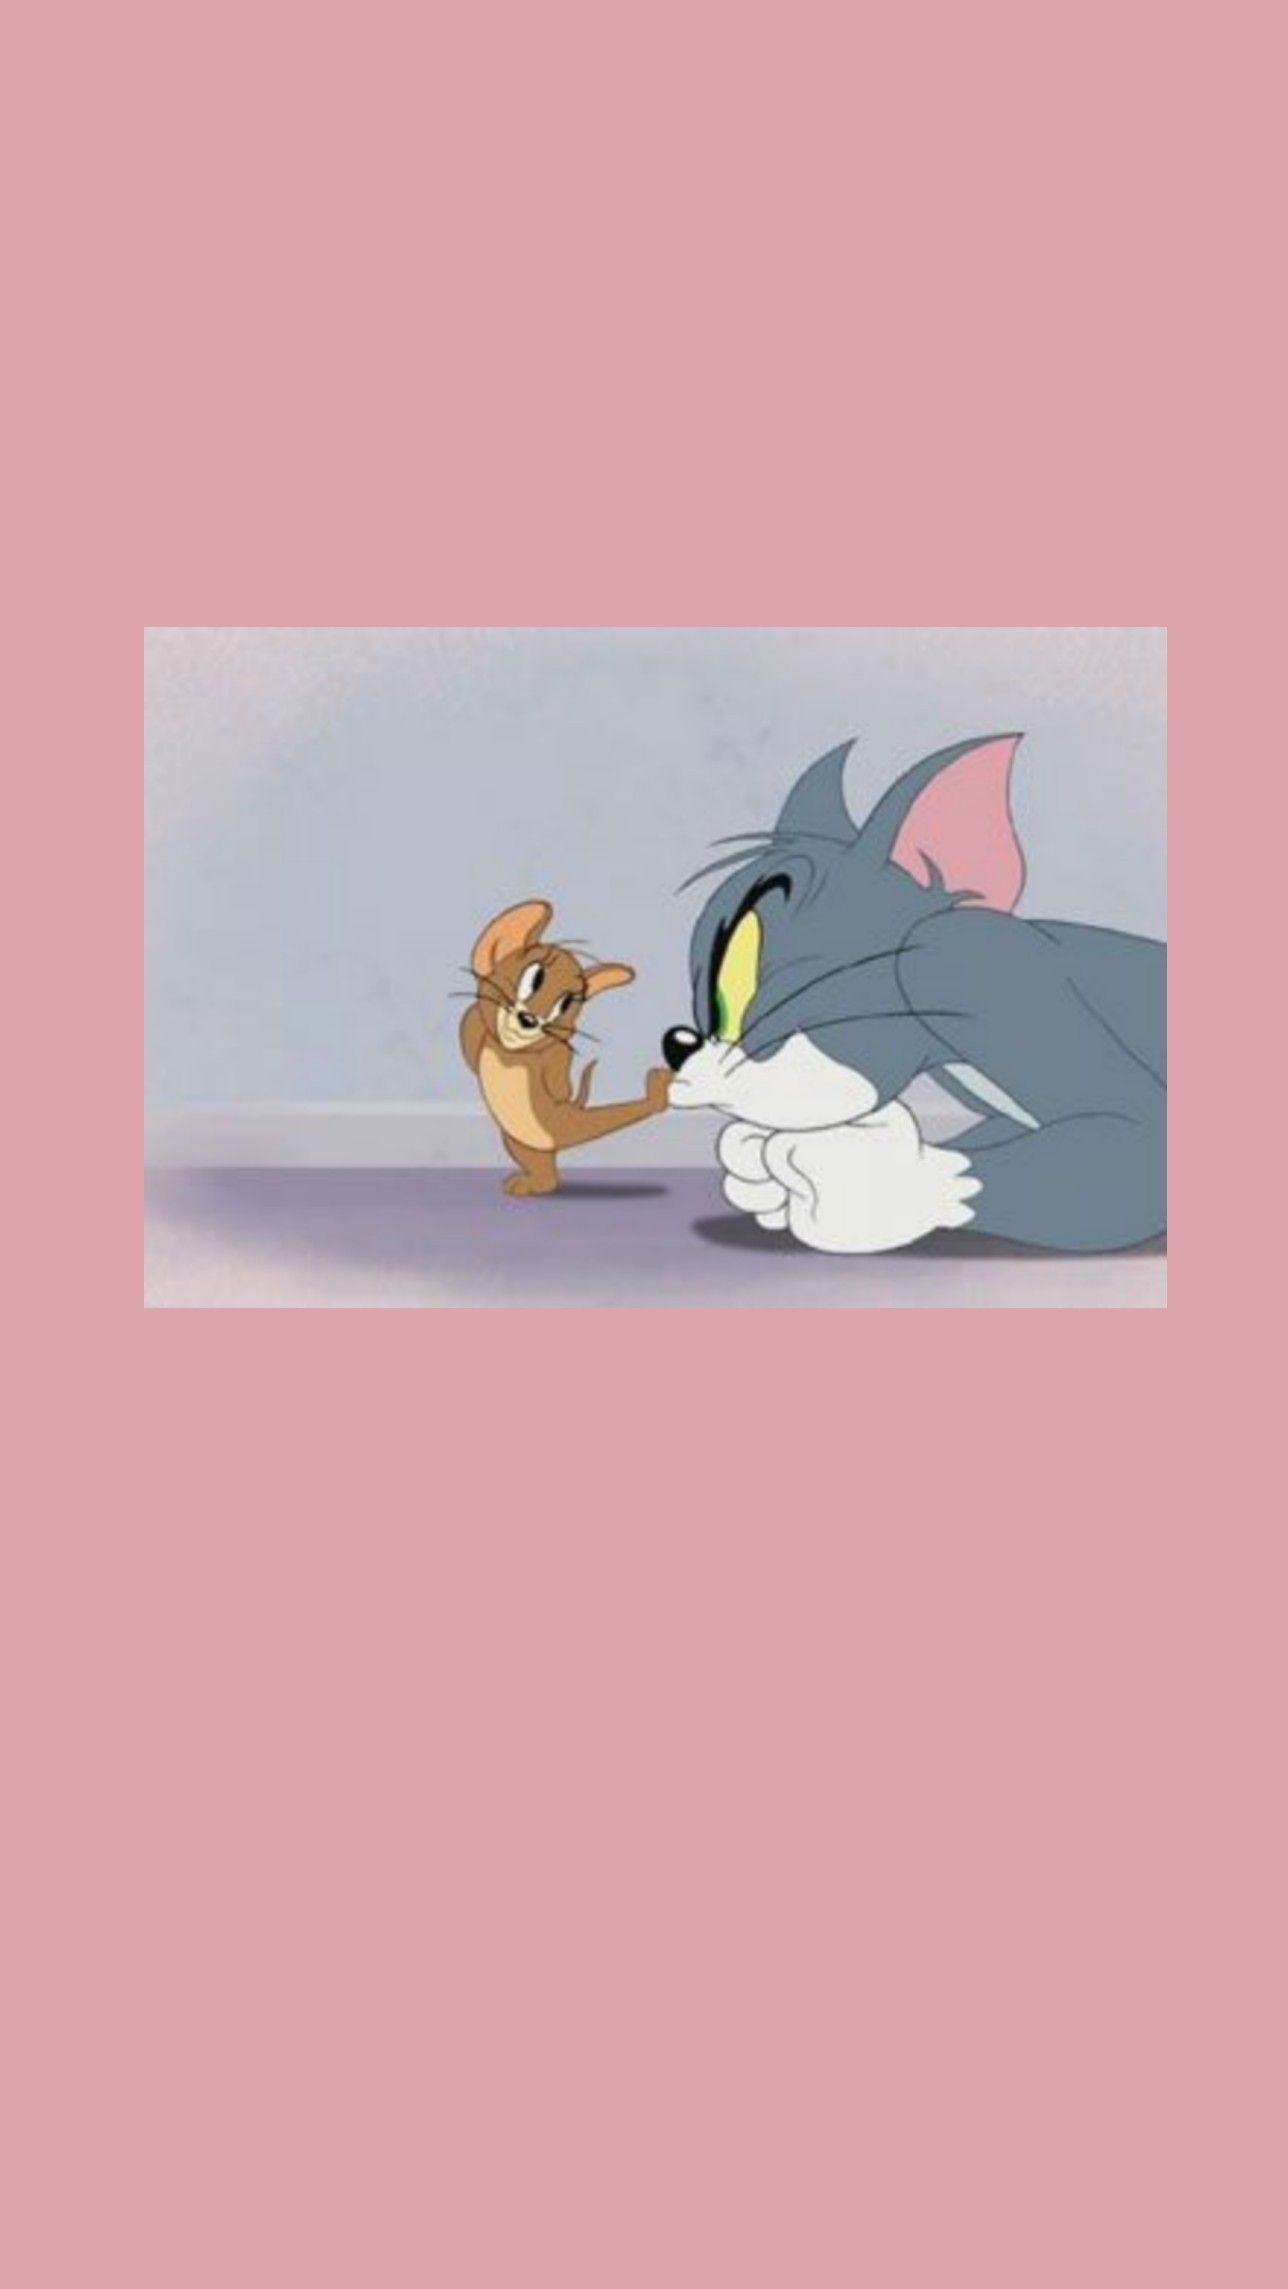 Tom y Jerry ✨. Tom and jerry wallpaper, Tom and jerry memes, Vintage cartoon